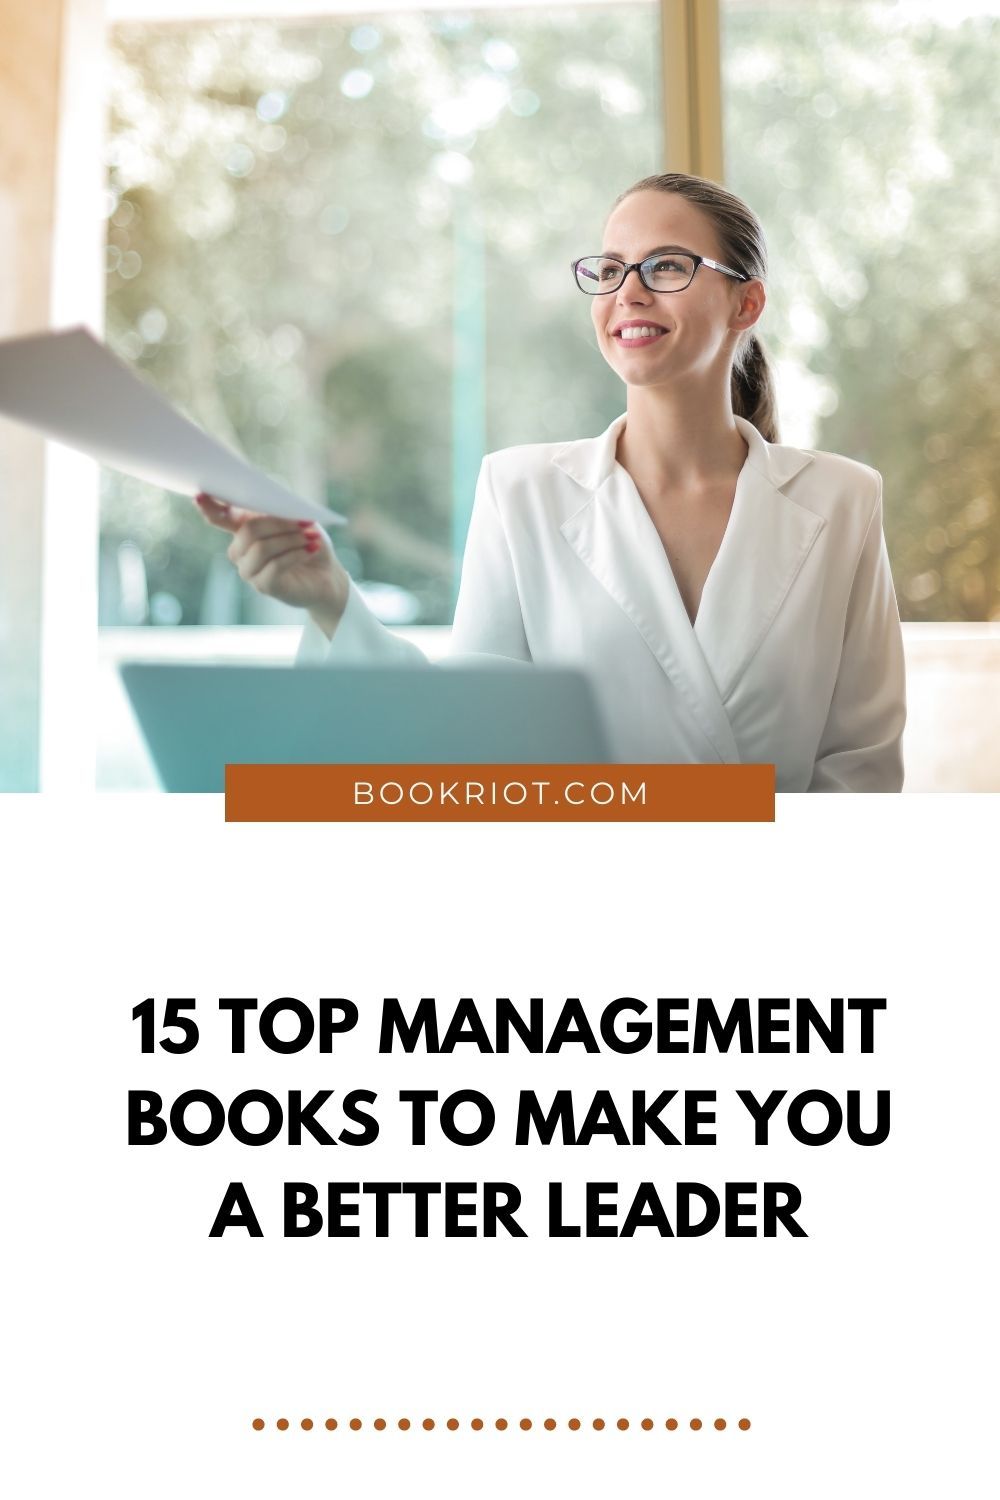 15 Top Management Books to Make You a Better Leader Book Riot